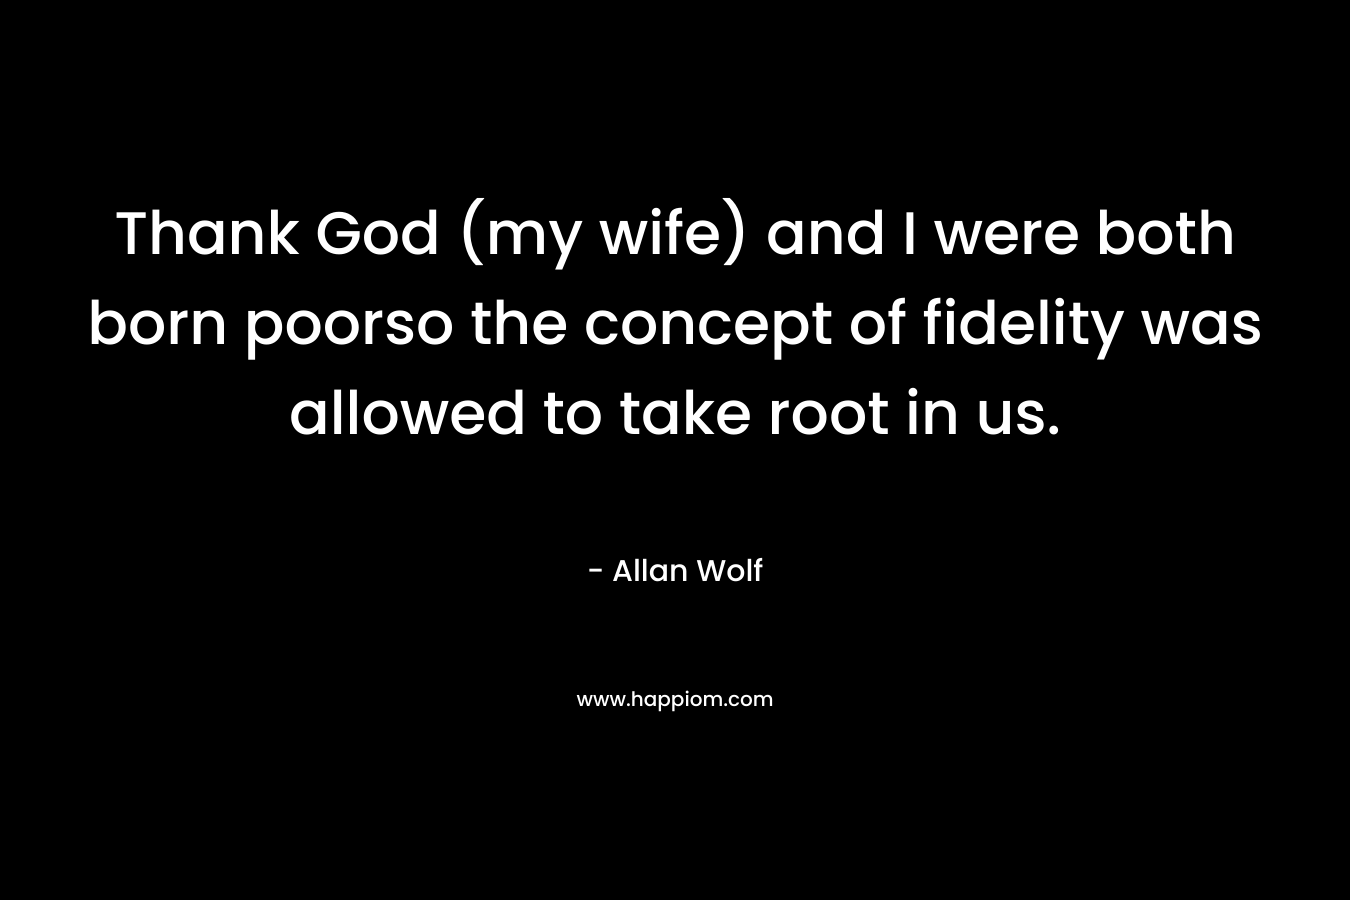 Thank God (my wife) and I were both born poorso the concept of fidelity was allowed to take root in us.